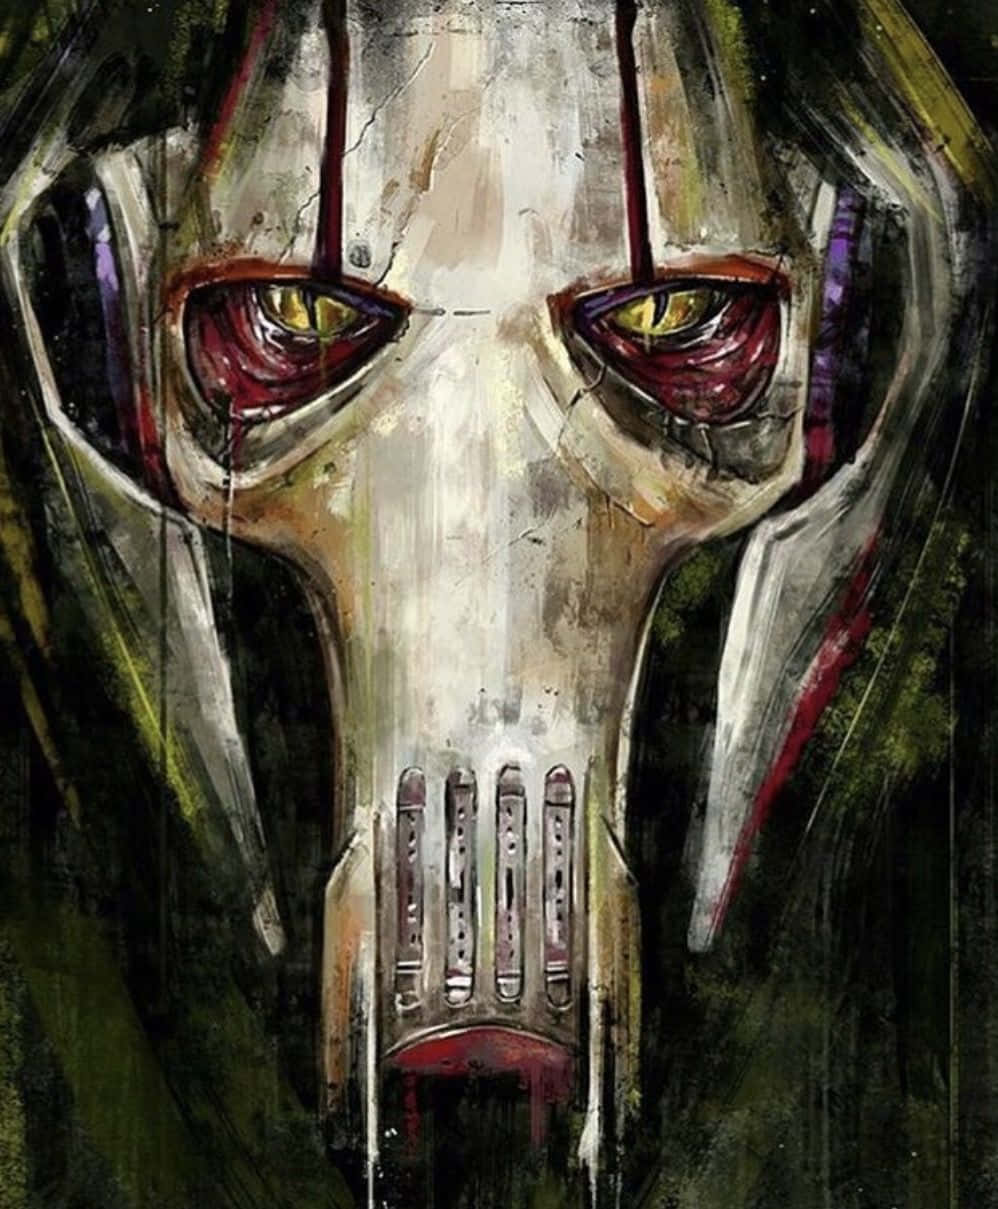 General Grievous—an Iconic Villain Within The Star Wars Franchise